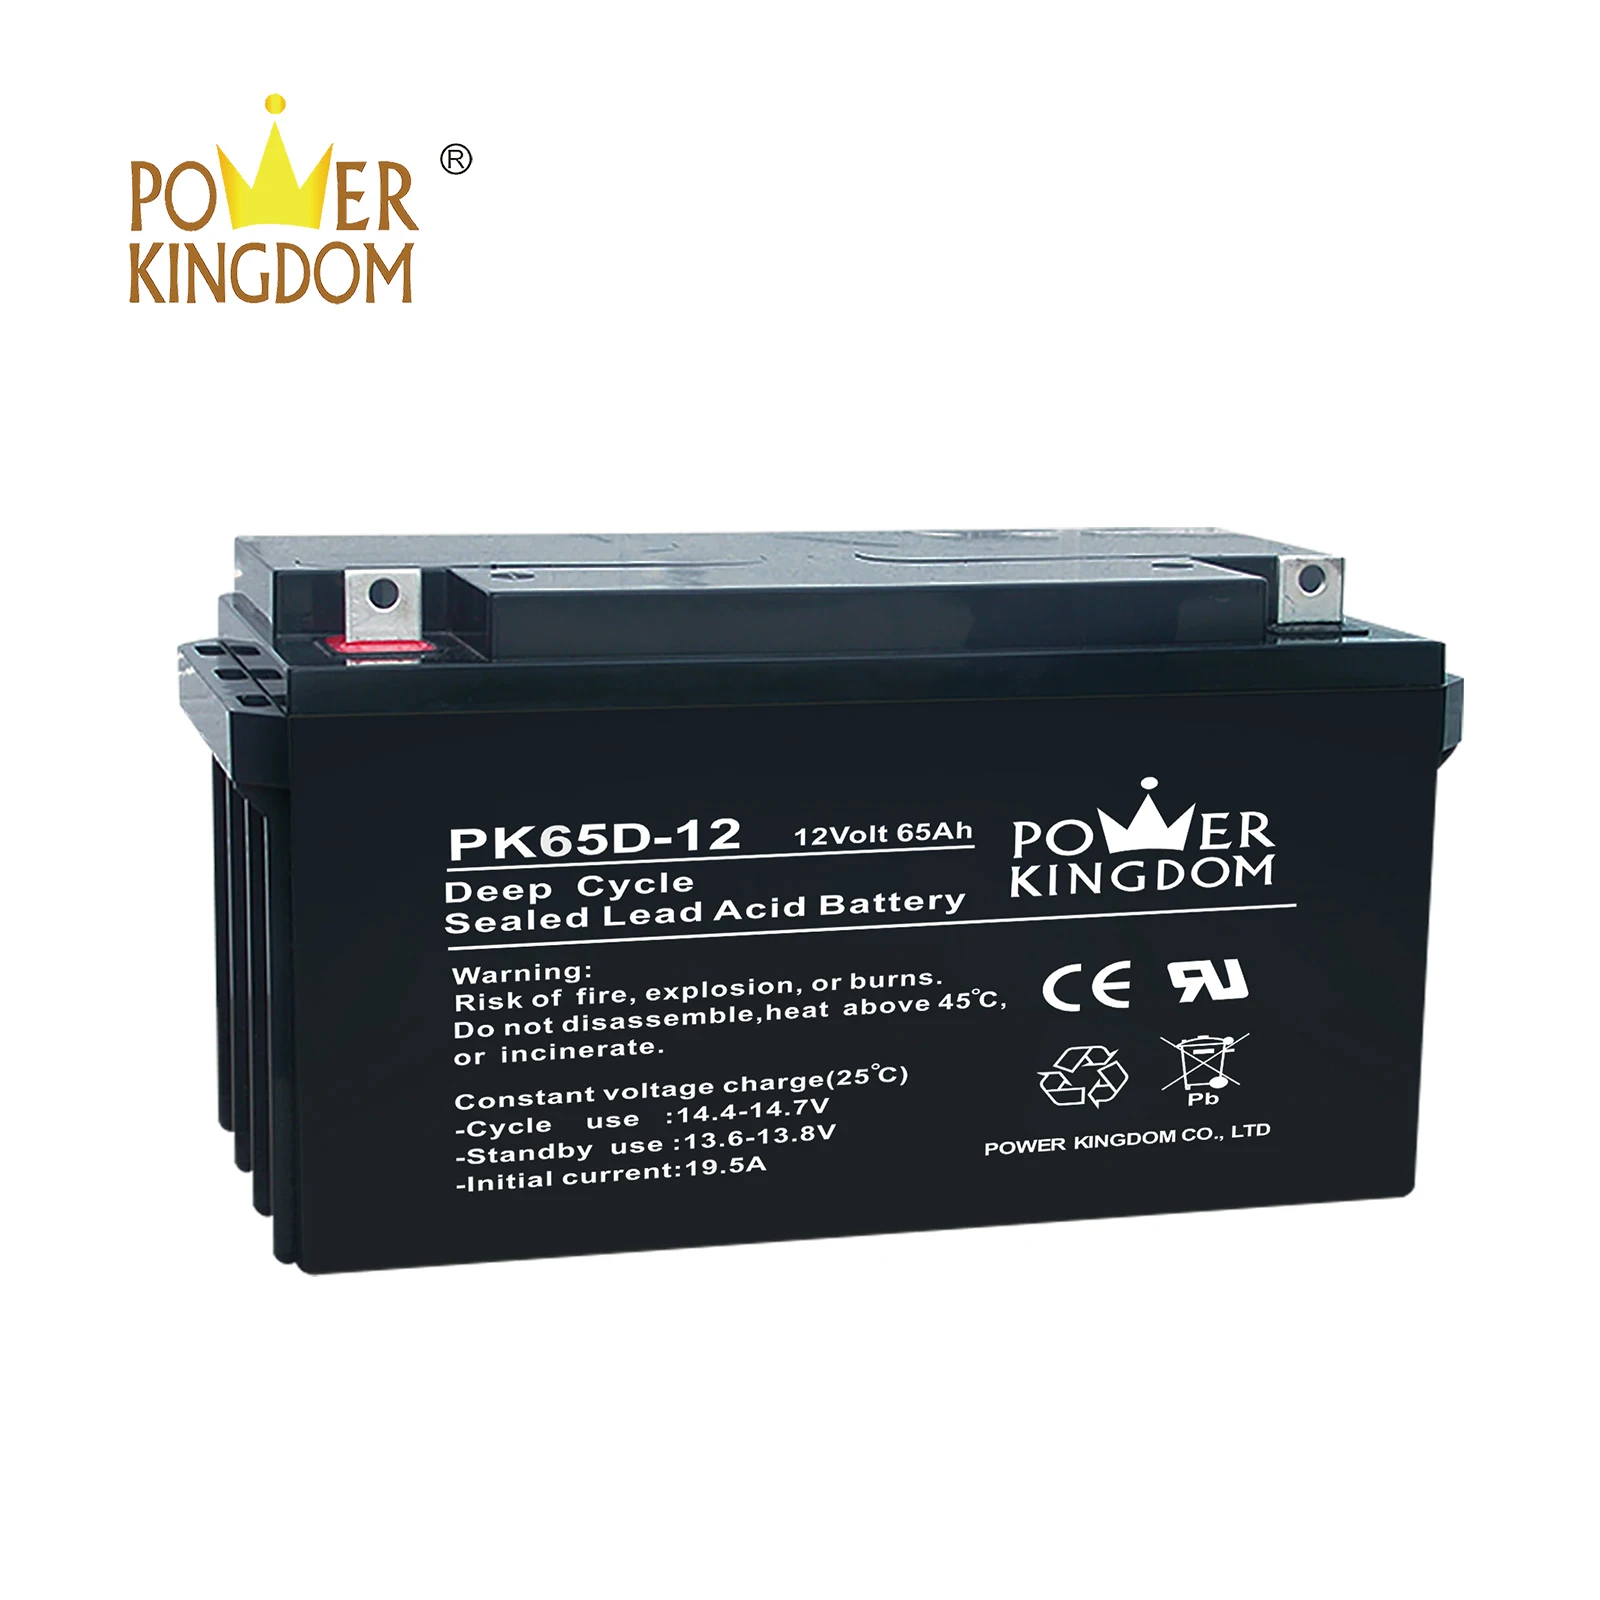 Power Kingdom 130 amp deep cycle battery factory wind power systems